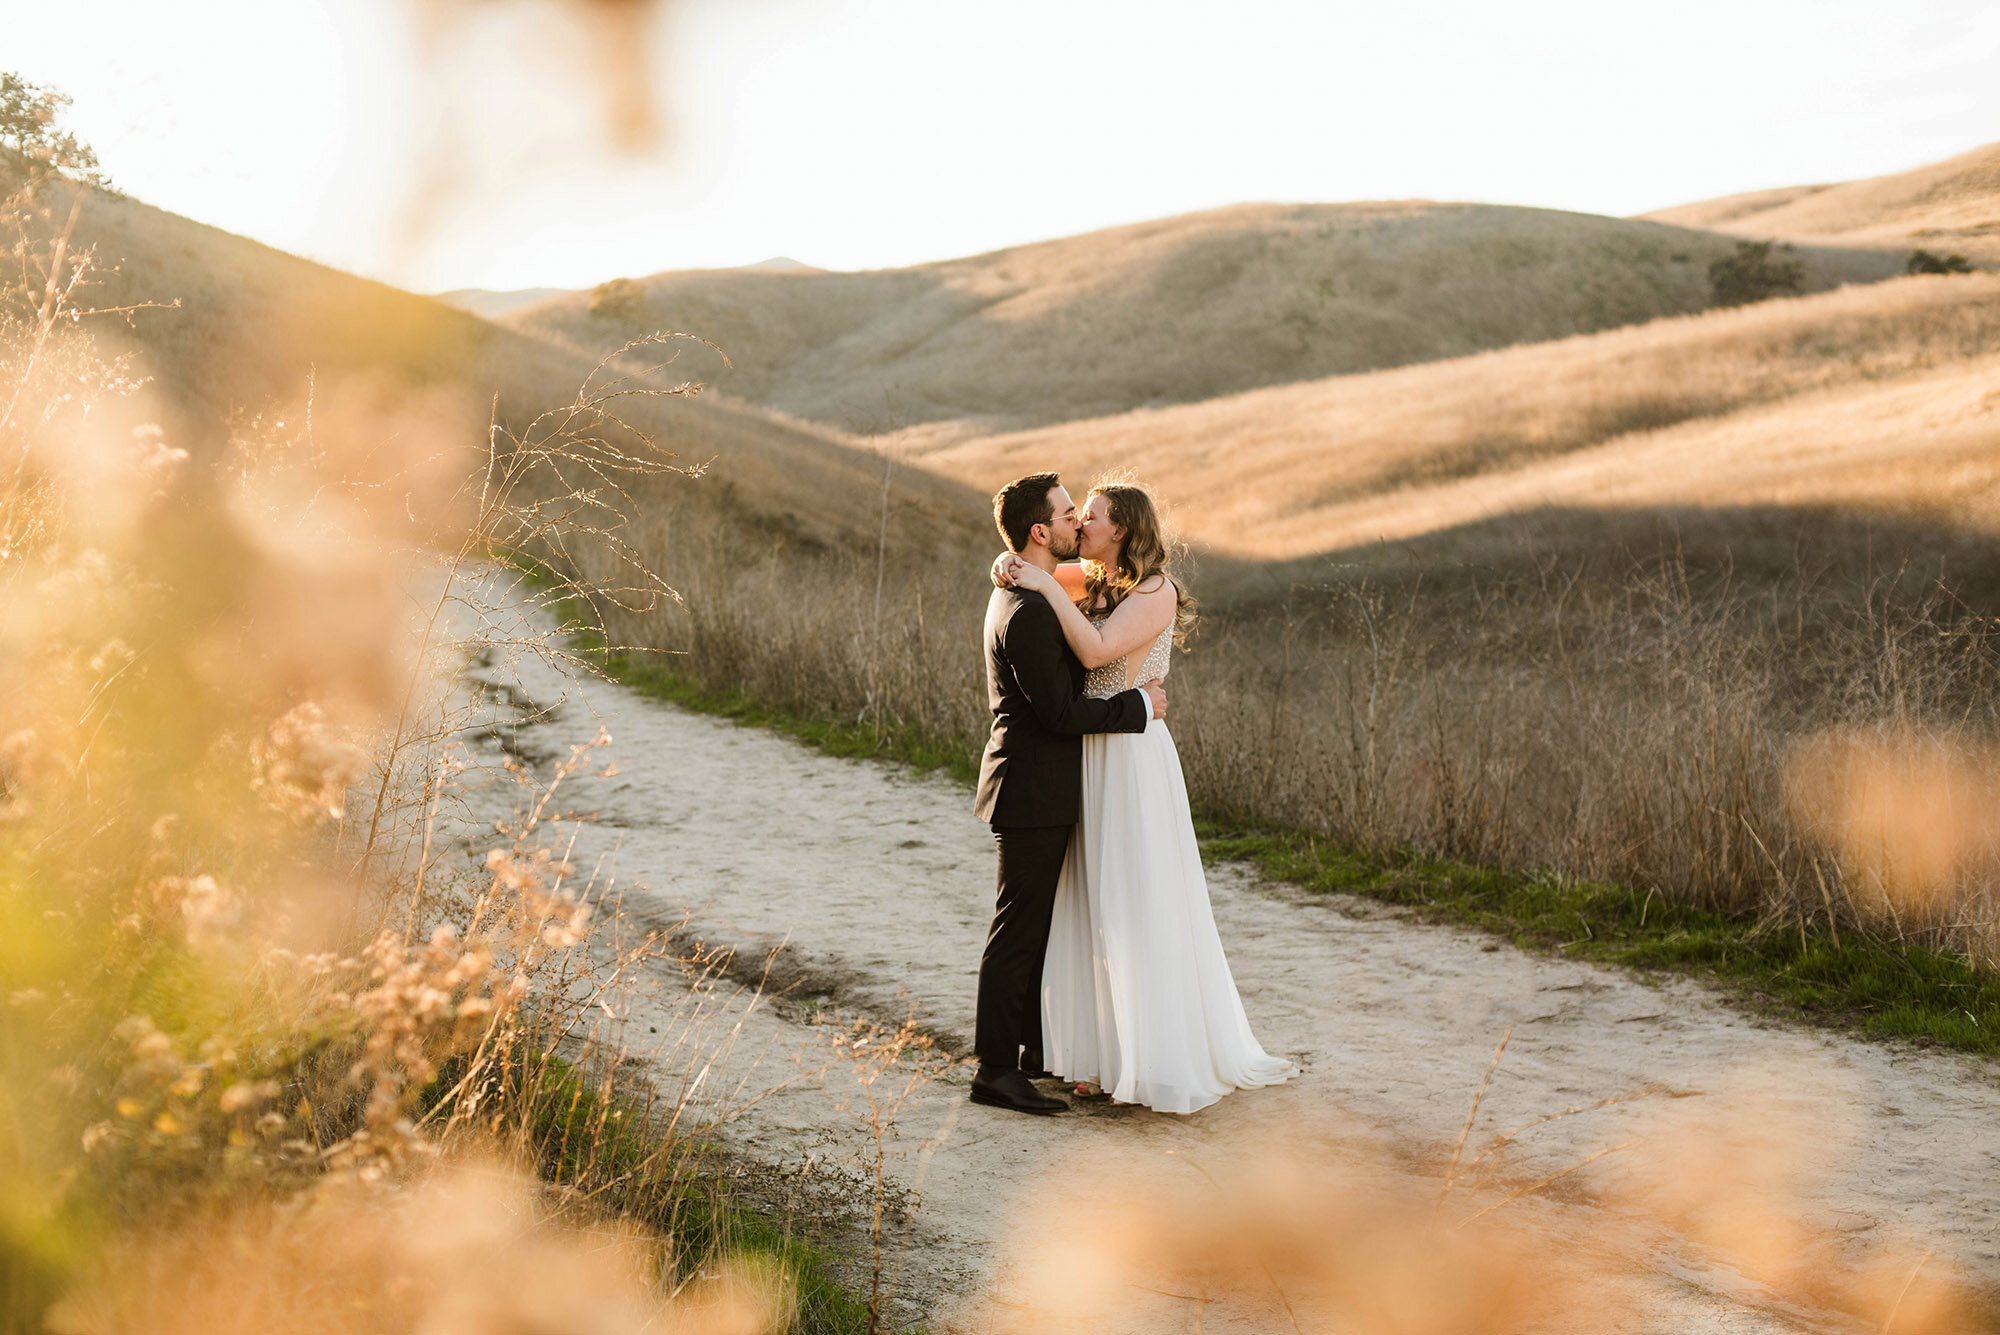 A romantic and sun filled elopement